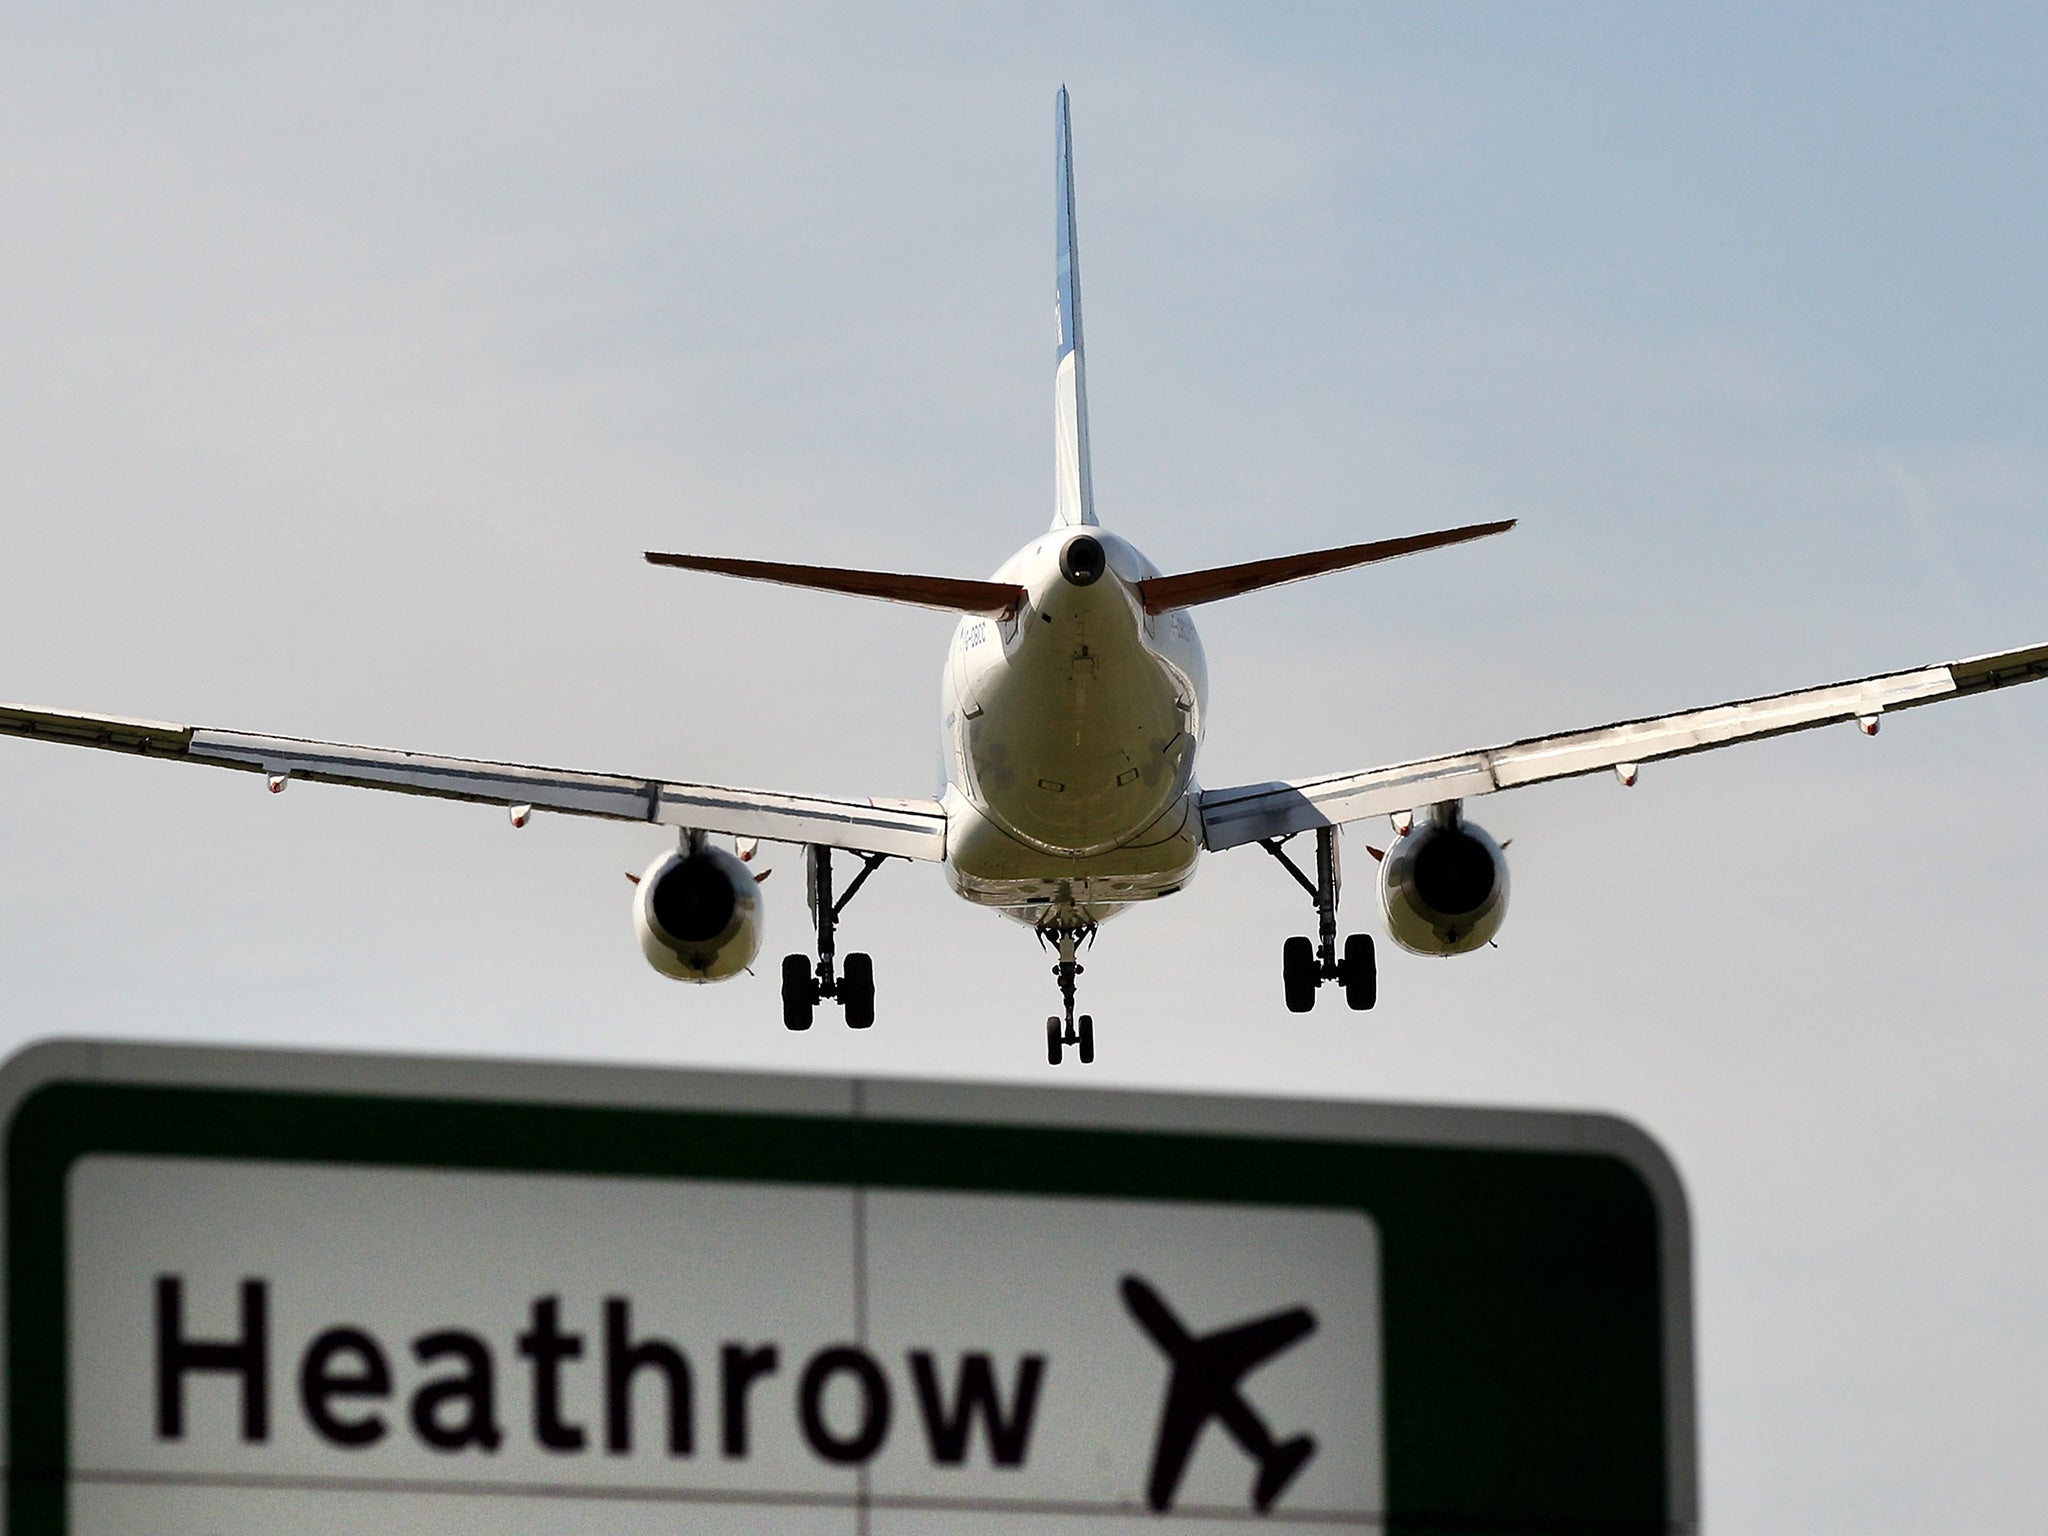 The woman was arrested on her return to Heathrow Airport